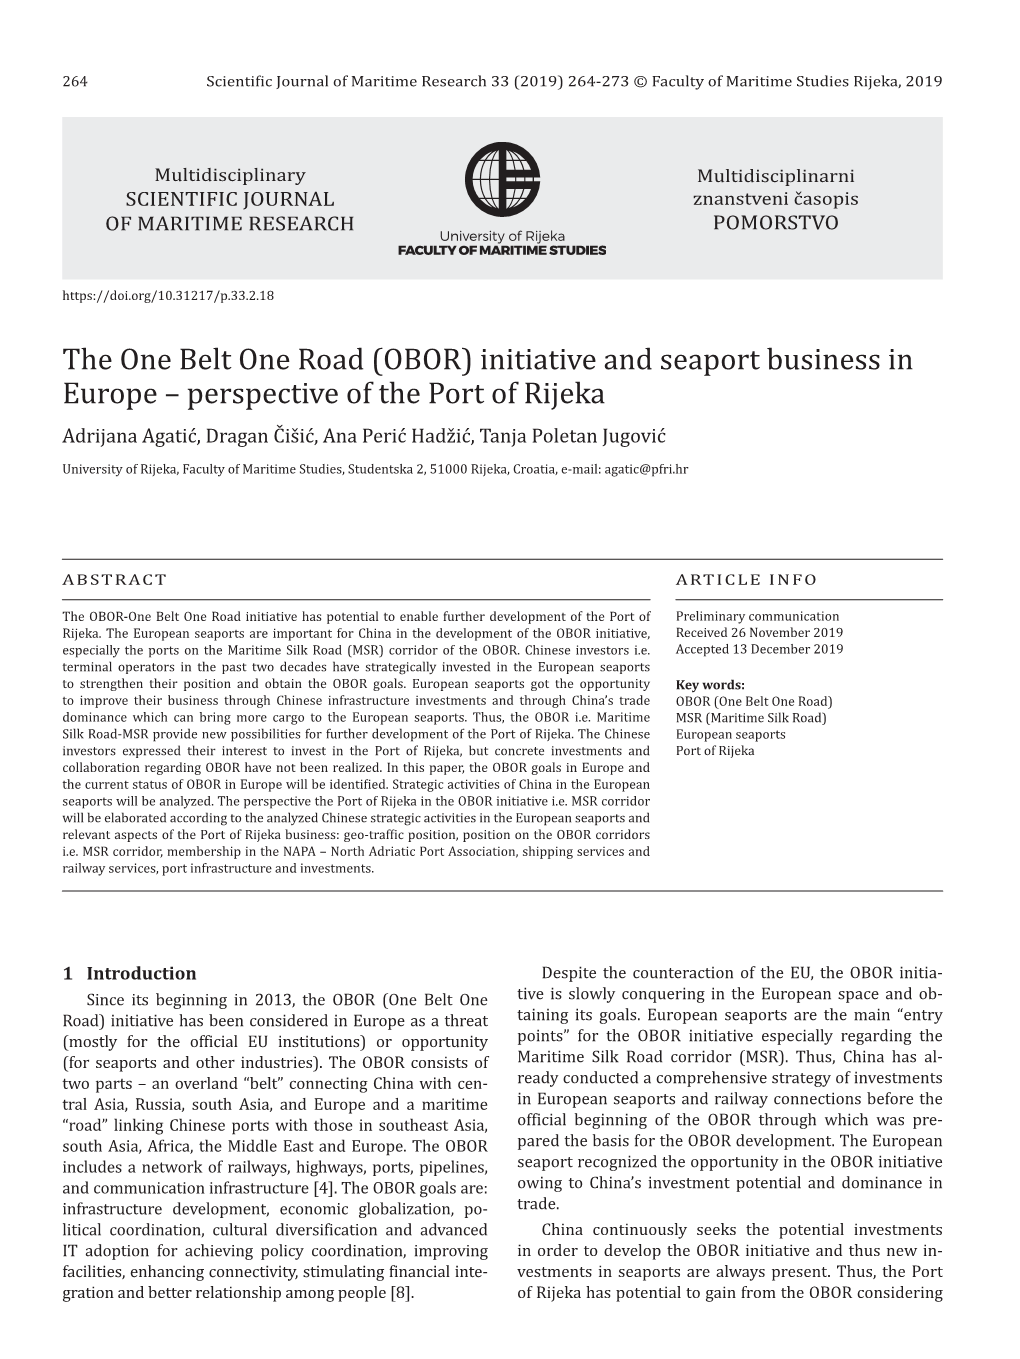 (OBOR) Initiative and Seaport Business in Europe